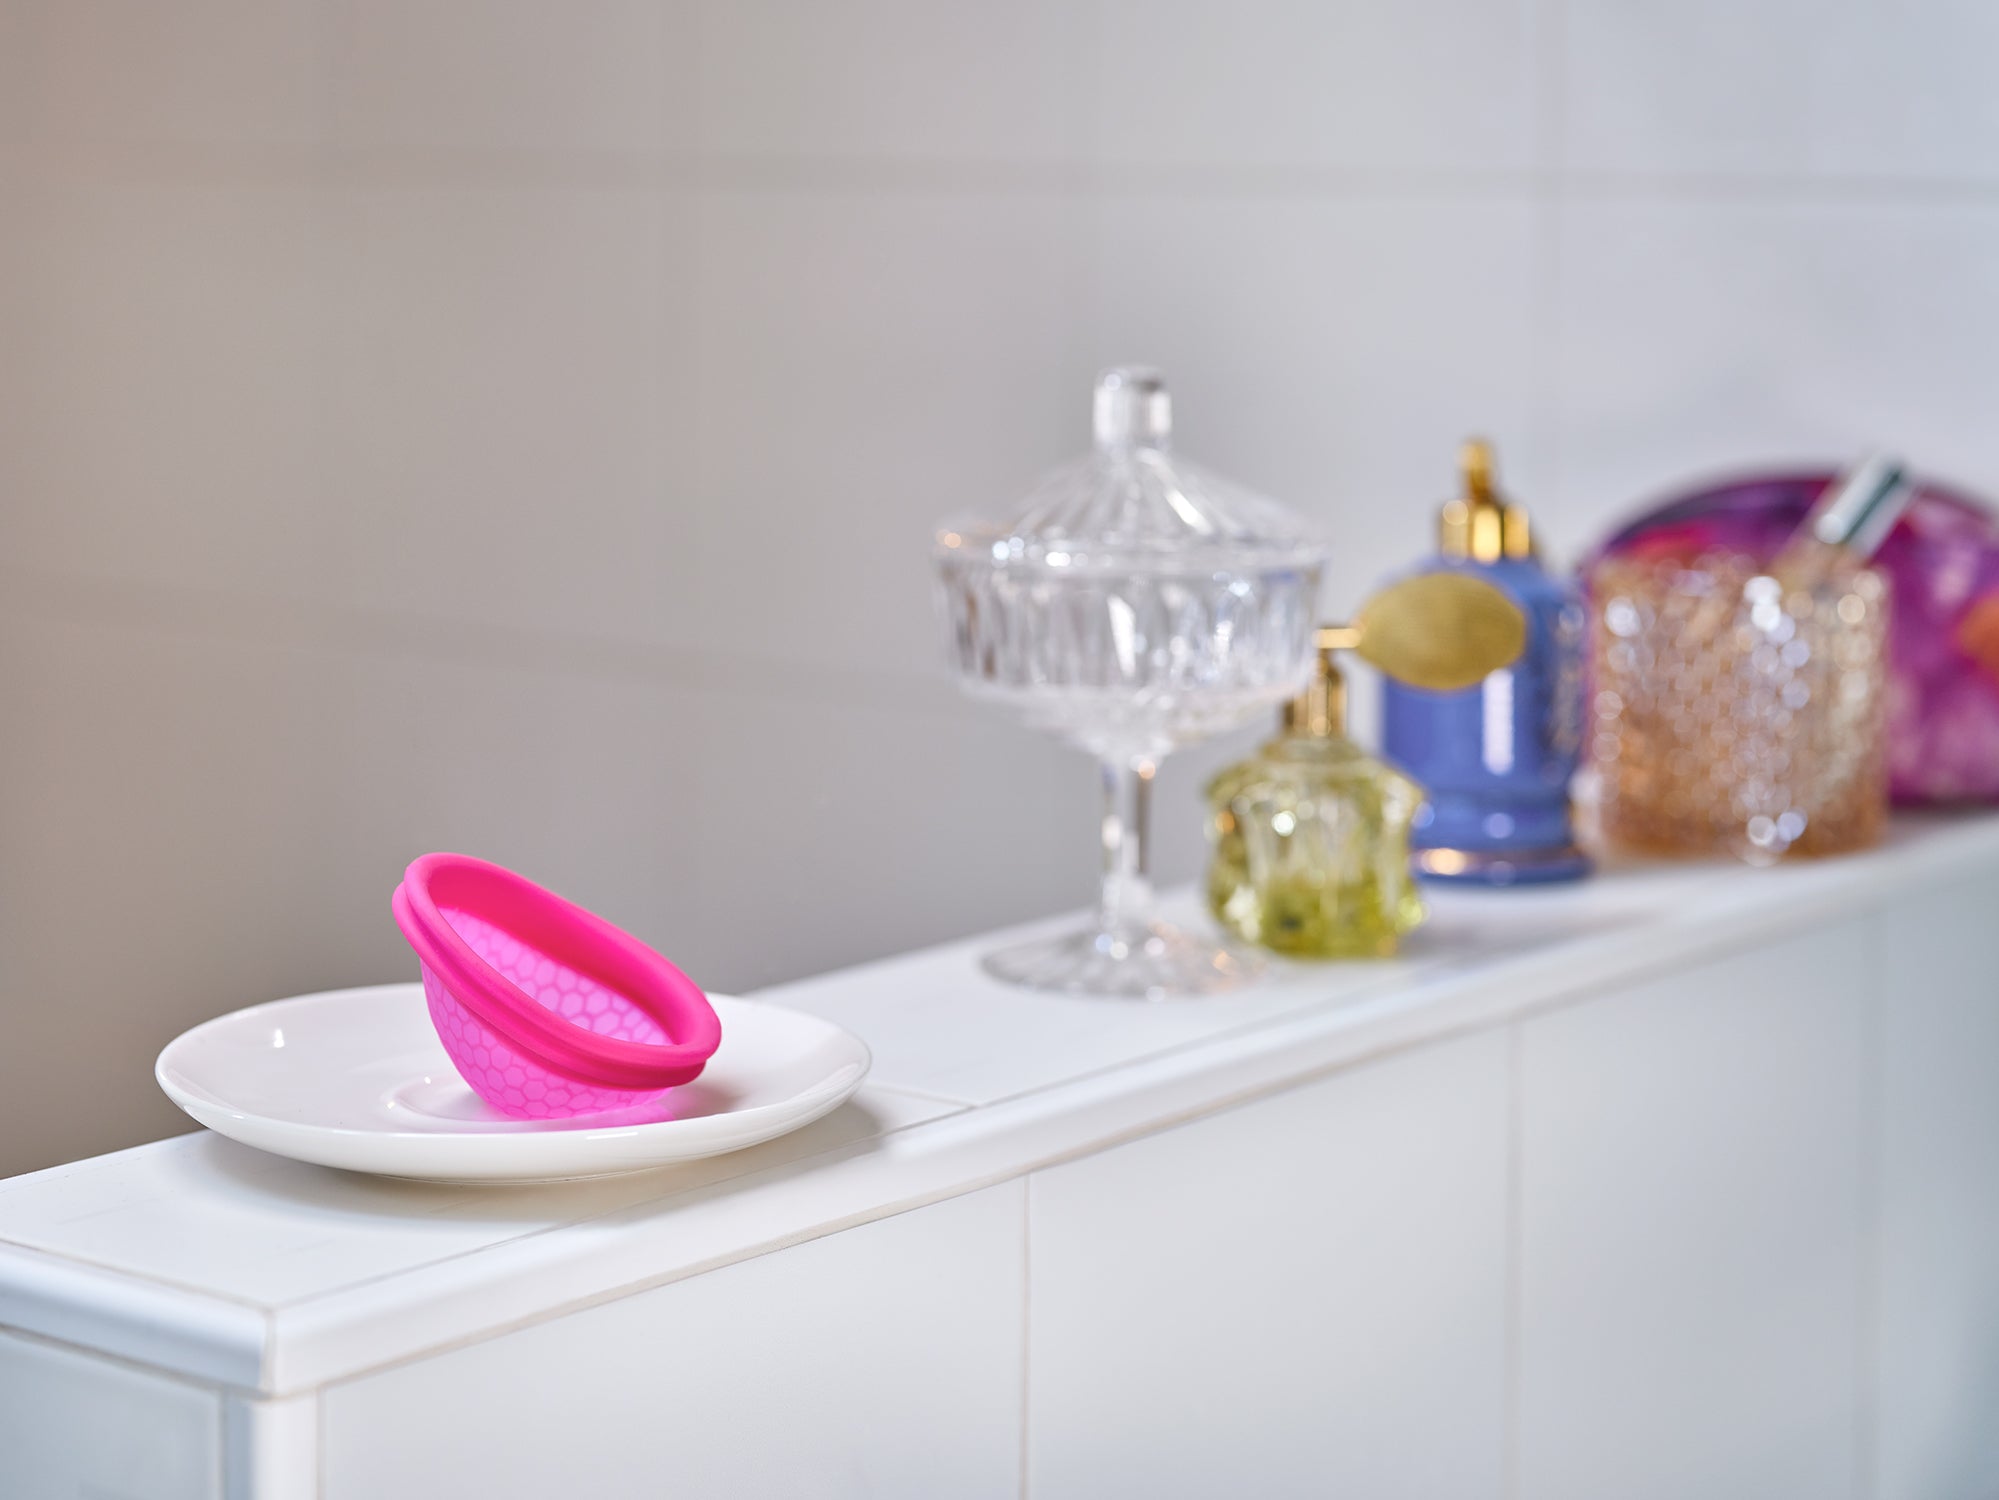 period disc in a white bathroom. Our number one menstrual disc and the only one that can be used to enjoy mess-free period love, while providing all the perks of a cup! The Ziggy Cup is made of petal-thin silicone that can’t be felt no matter what you’re doing. הגביעונית מחזור או דיסק מחזור הכי טוב ונוח בארץ, תשדרגי את הווסת שלך עם הכביעונית הכי טובה